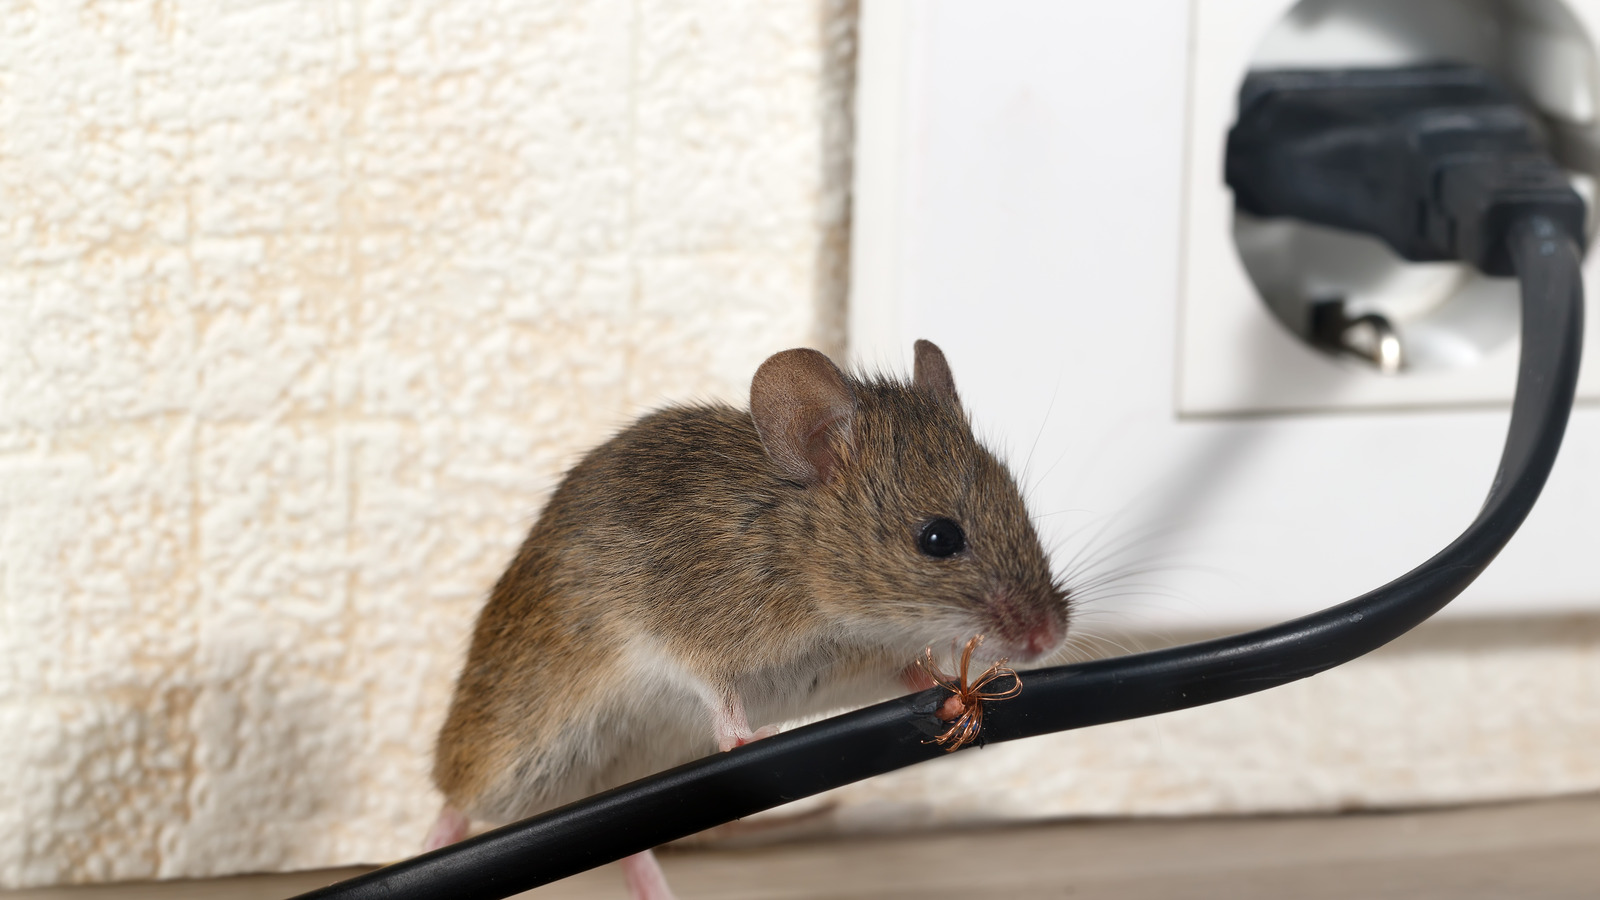 Can You Use Dryer Sheets To Keep Mice Away?